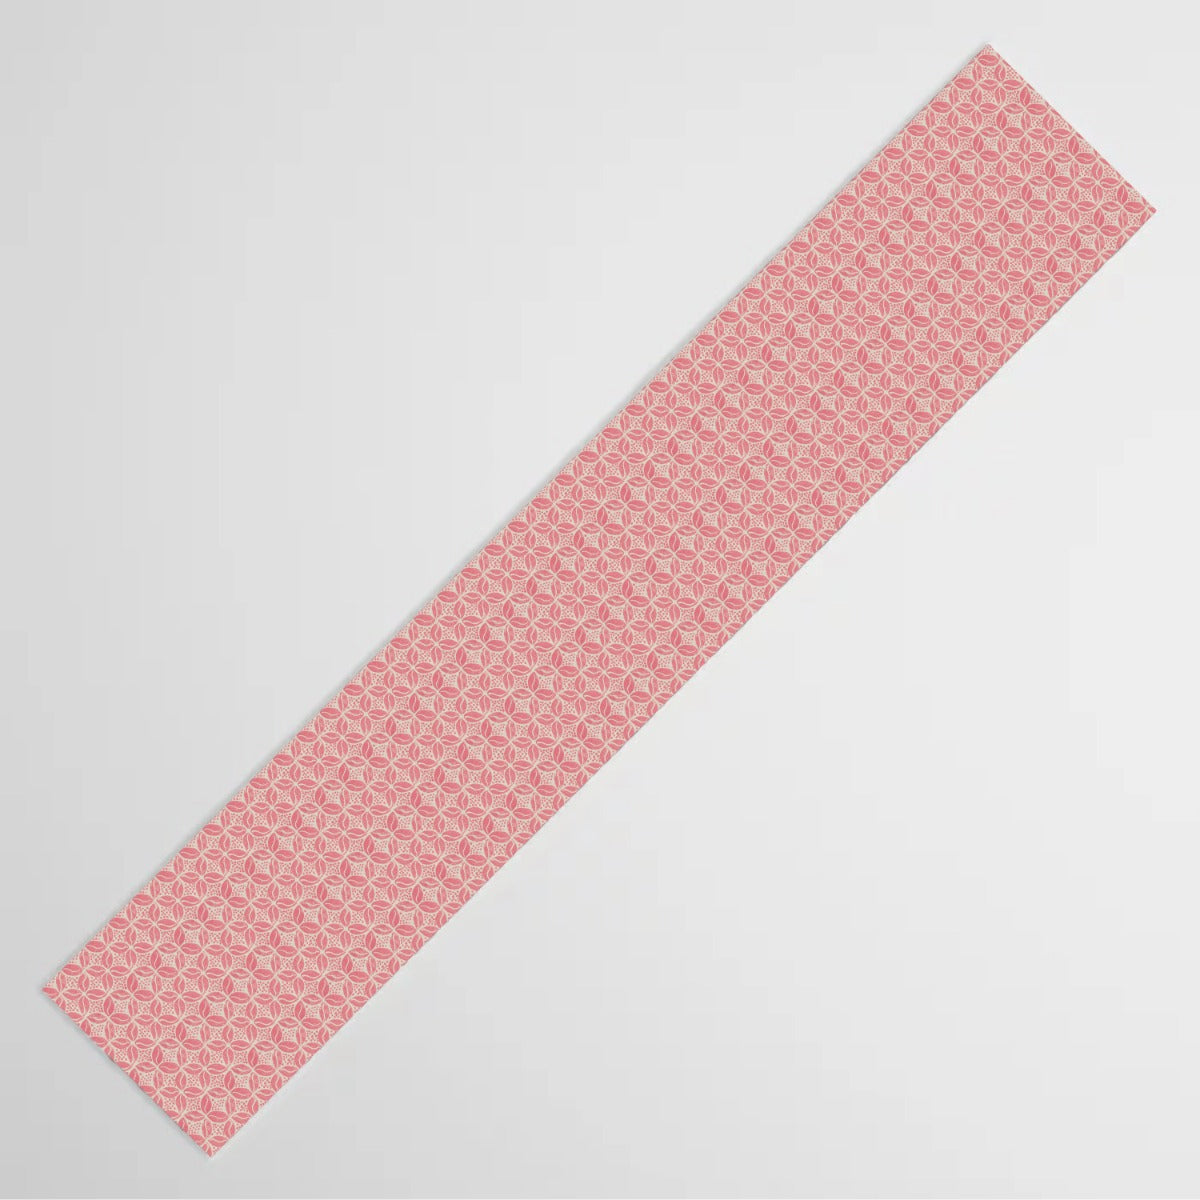 Pink Dots Table Runner